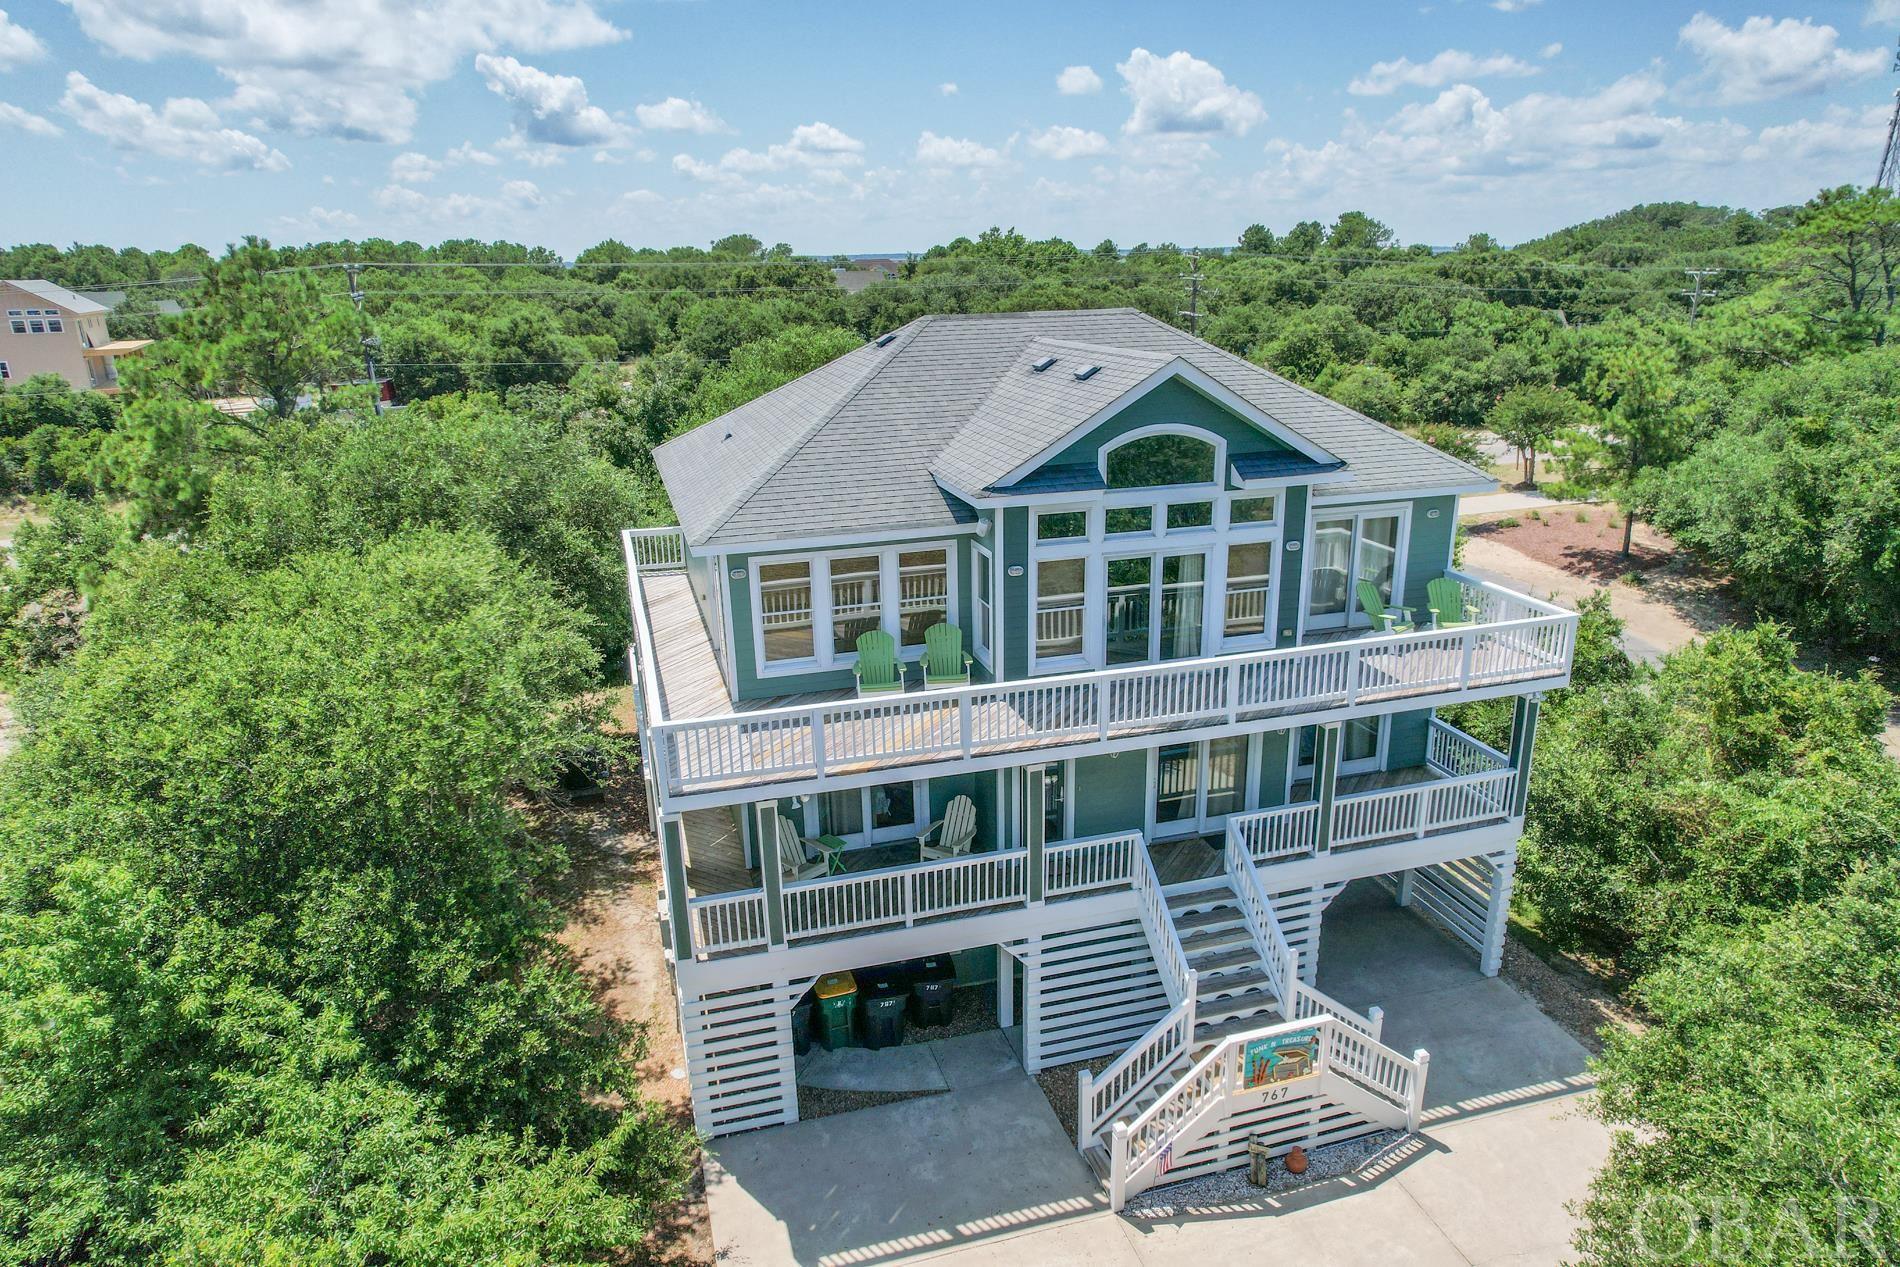 Nestled away on a cul-de-sac w/an extremely thought out floor plan, this 3 story coastal vacation home is a rental powerhouse! Located on the ocean side of Rte 12, its only 3 blocks/.3 mile/6 mins from ocean access. This beauty sleeps 19! Open concept great room w/cathedral ceilings, 4 bedrooms w/ ensuites, 3 addt’l bedrooms & a flex room, 2.5 addt’l baths, heated pool, hot tub, outdoor shower, pool table FREIGHT LIFT, & oversized driveway that can fit up to 10 full sized cars. Newer Lovesac furniture, large dining room table & a fully stocked kitchen w/ 2 dishwashers, 2 refrigerators & deep freezer. Community bike path, shopping & restaurants nearby. Renters keep returning; had over $99K on the books for 2021, almost $66K for 2022, $68K for 2023 & already over $61K for 2024. Be sure to see walk- thru video and 3D virtual tour! Whether a private vacation home for yourself or continued investment rental, you definitely don’t want to miss out on this one!